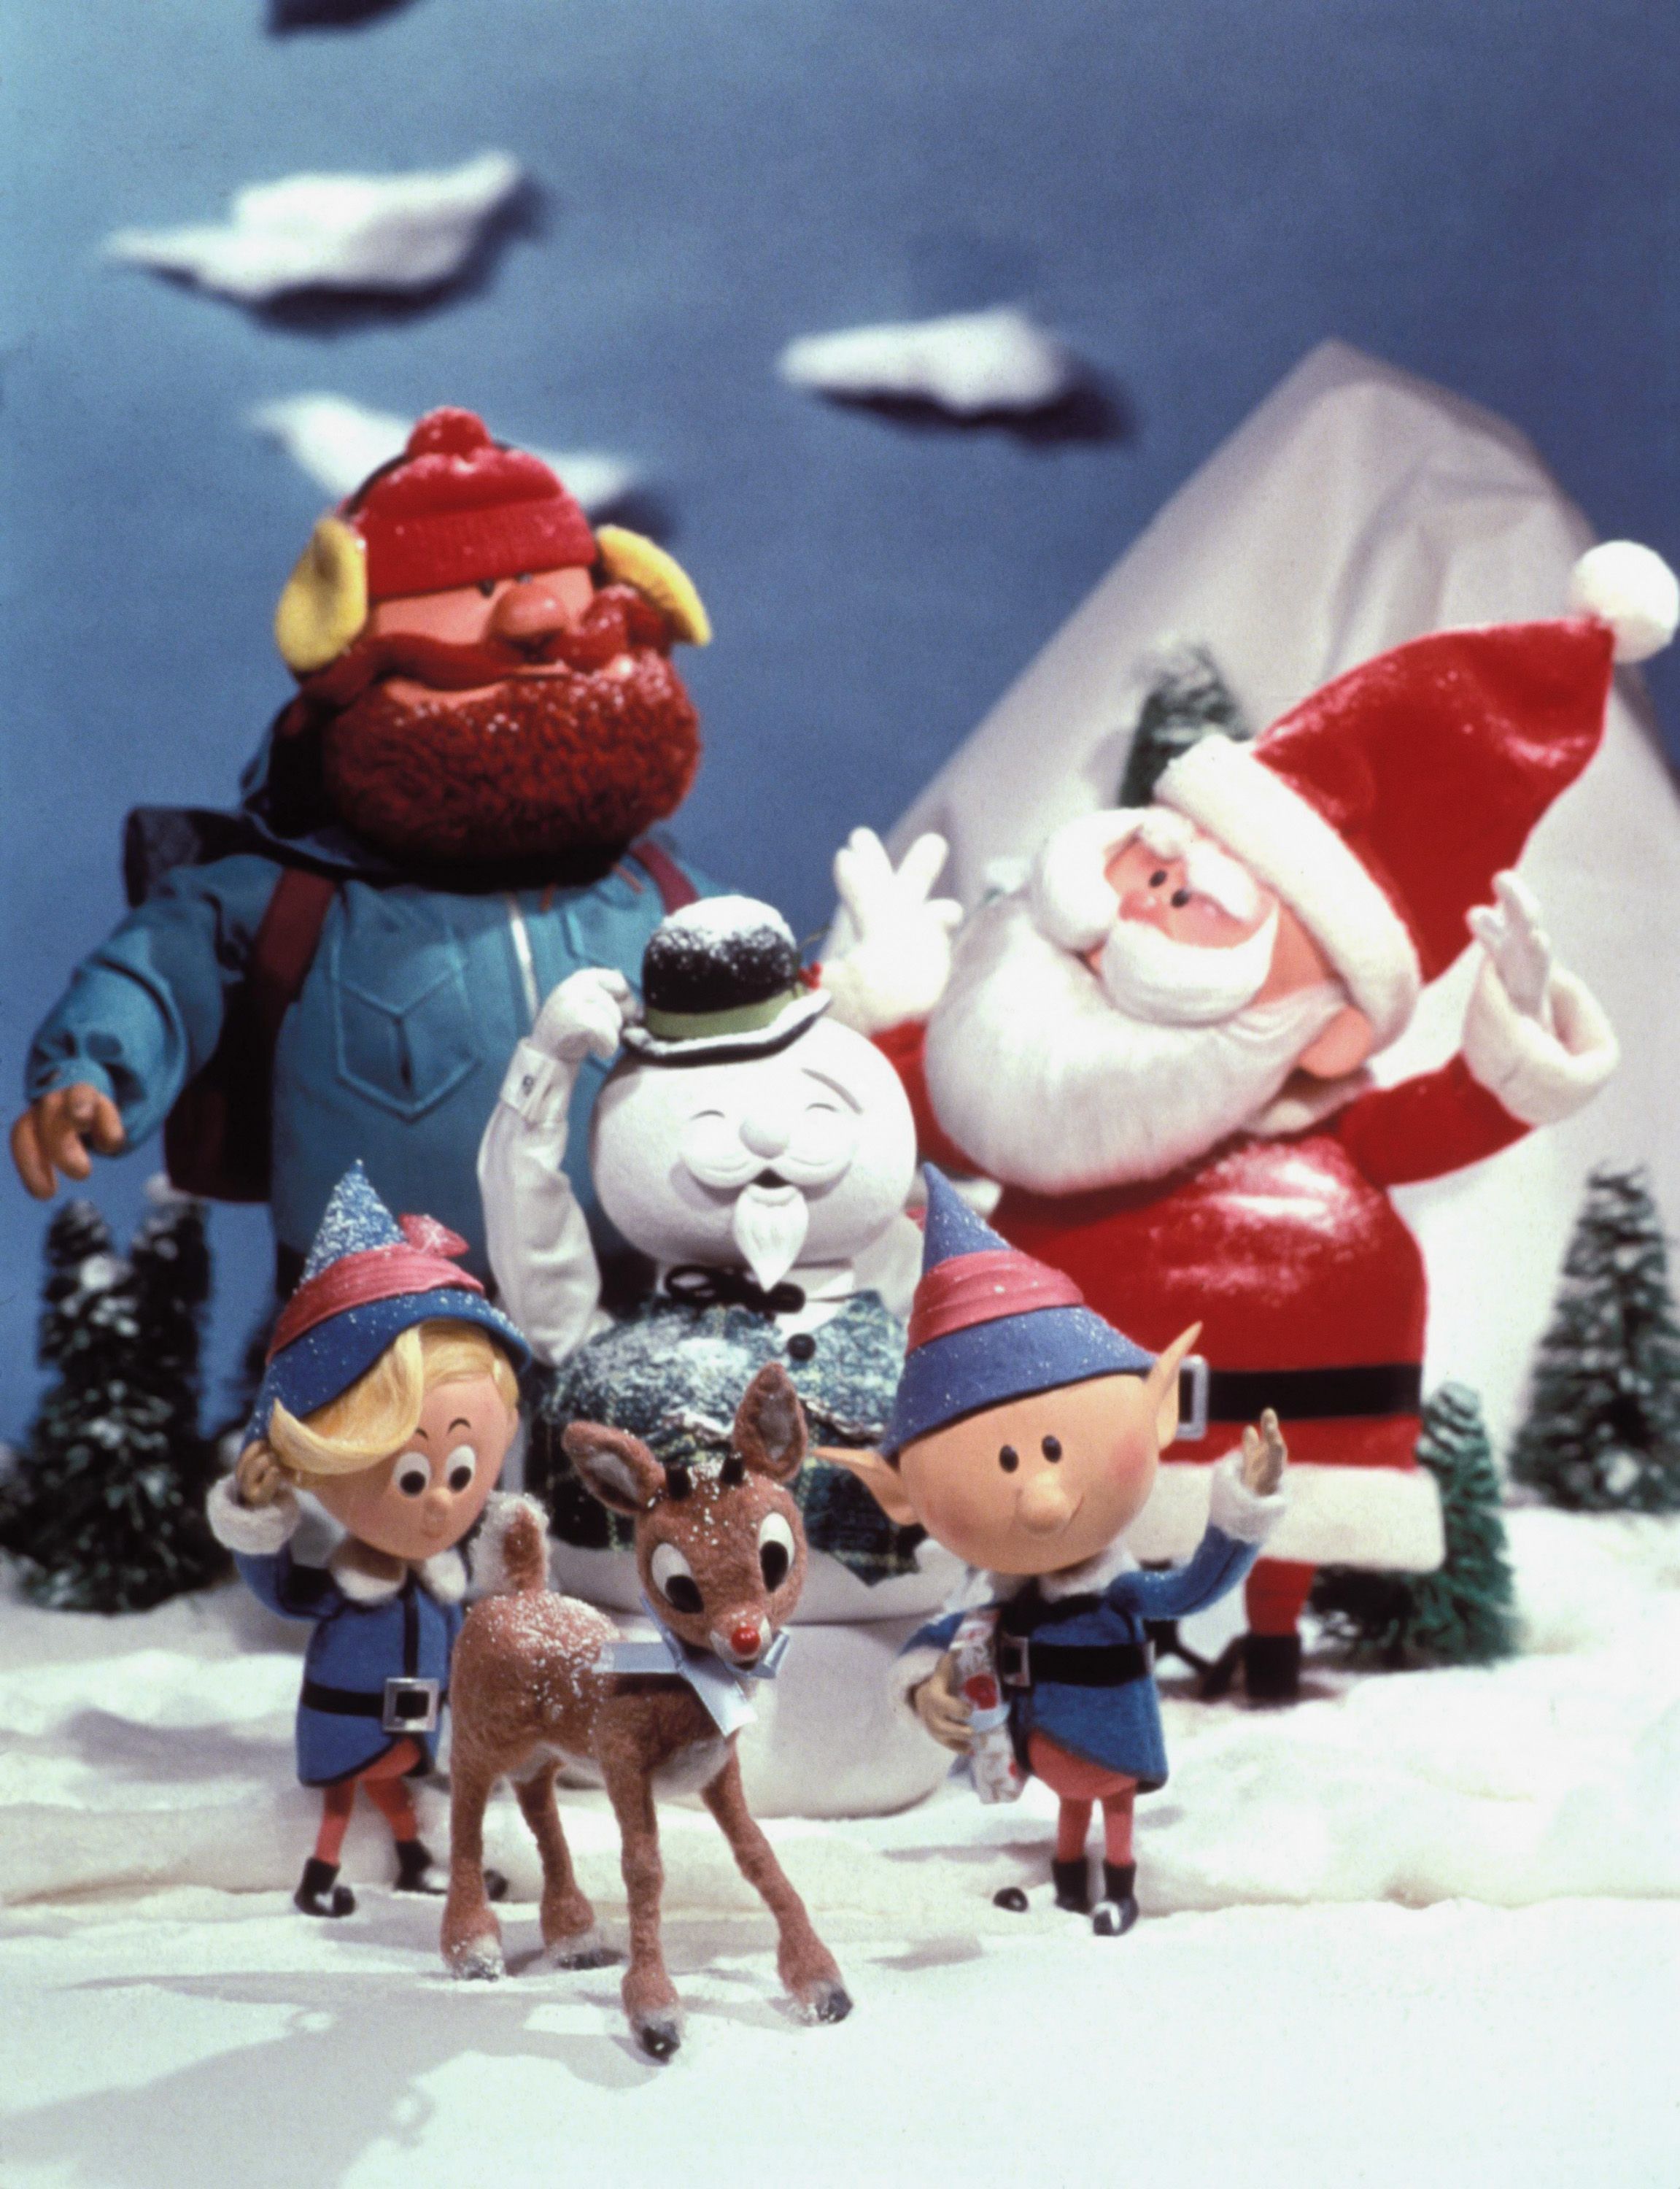 Rudolph The Red Nosed Reindeer' Sparks Mystery About Island Of Misfit Toys